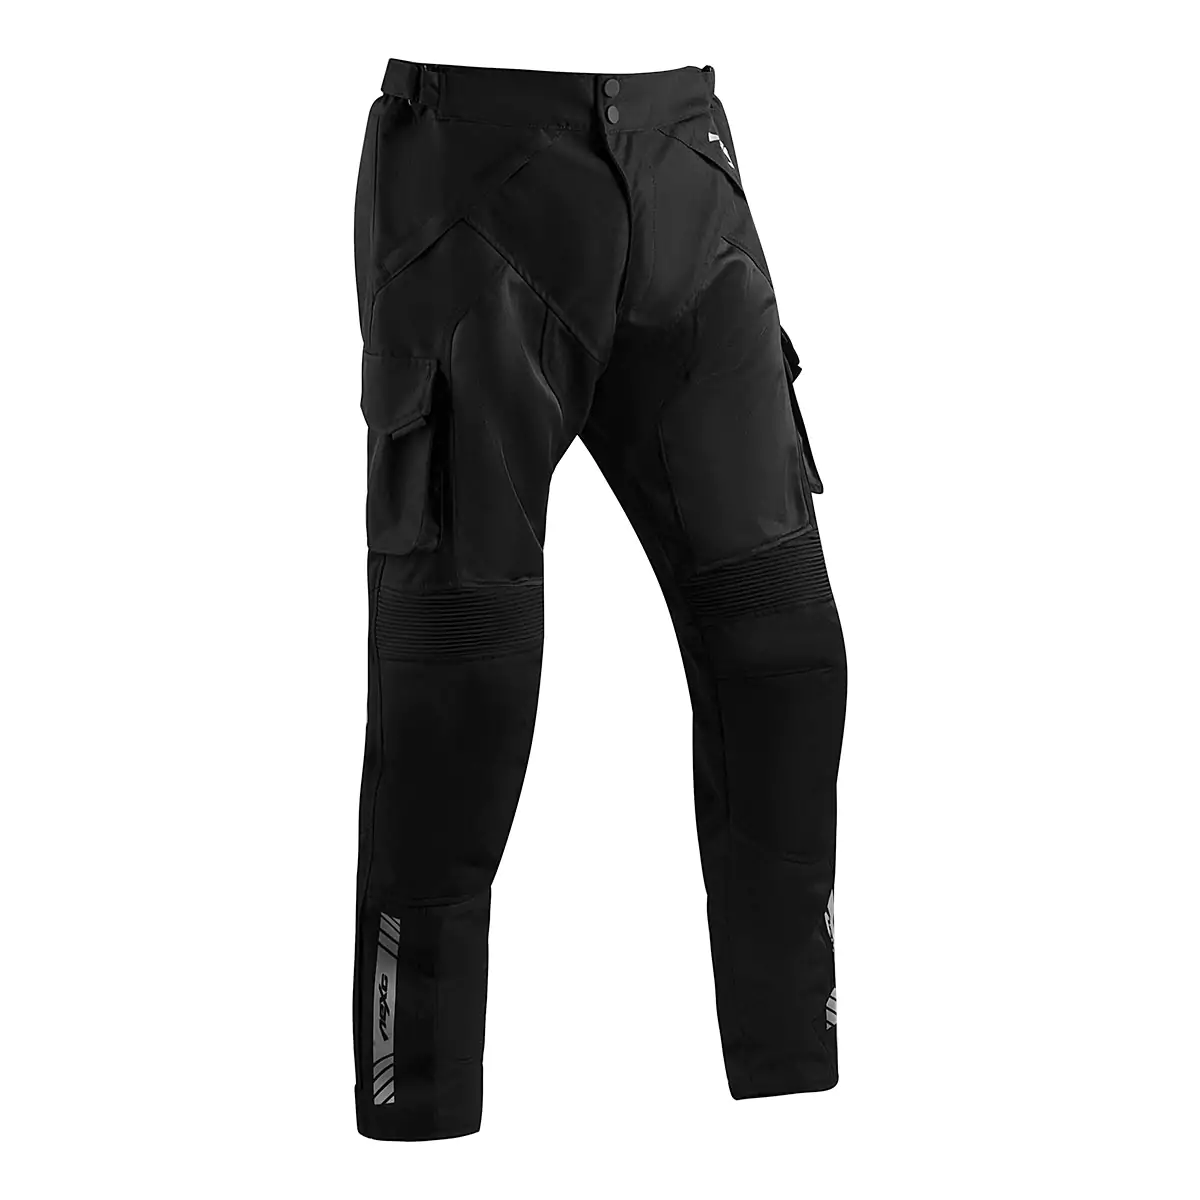 Black motorcycle textile pants with protective padding and adjustable straps.